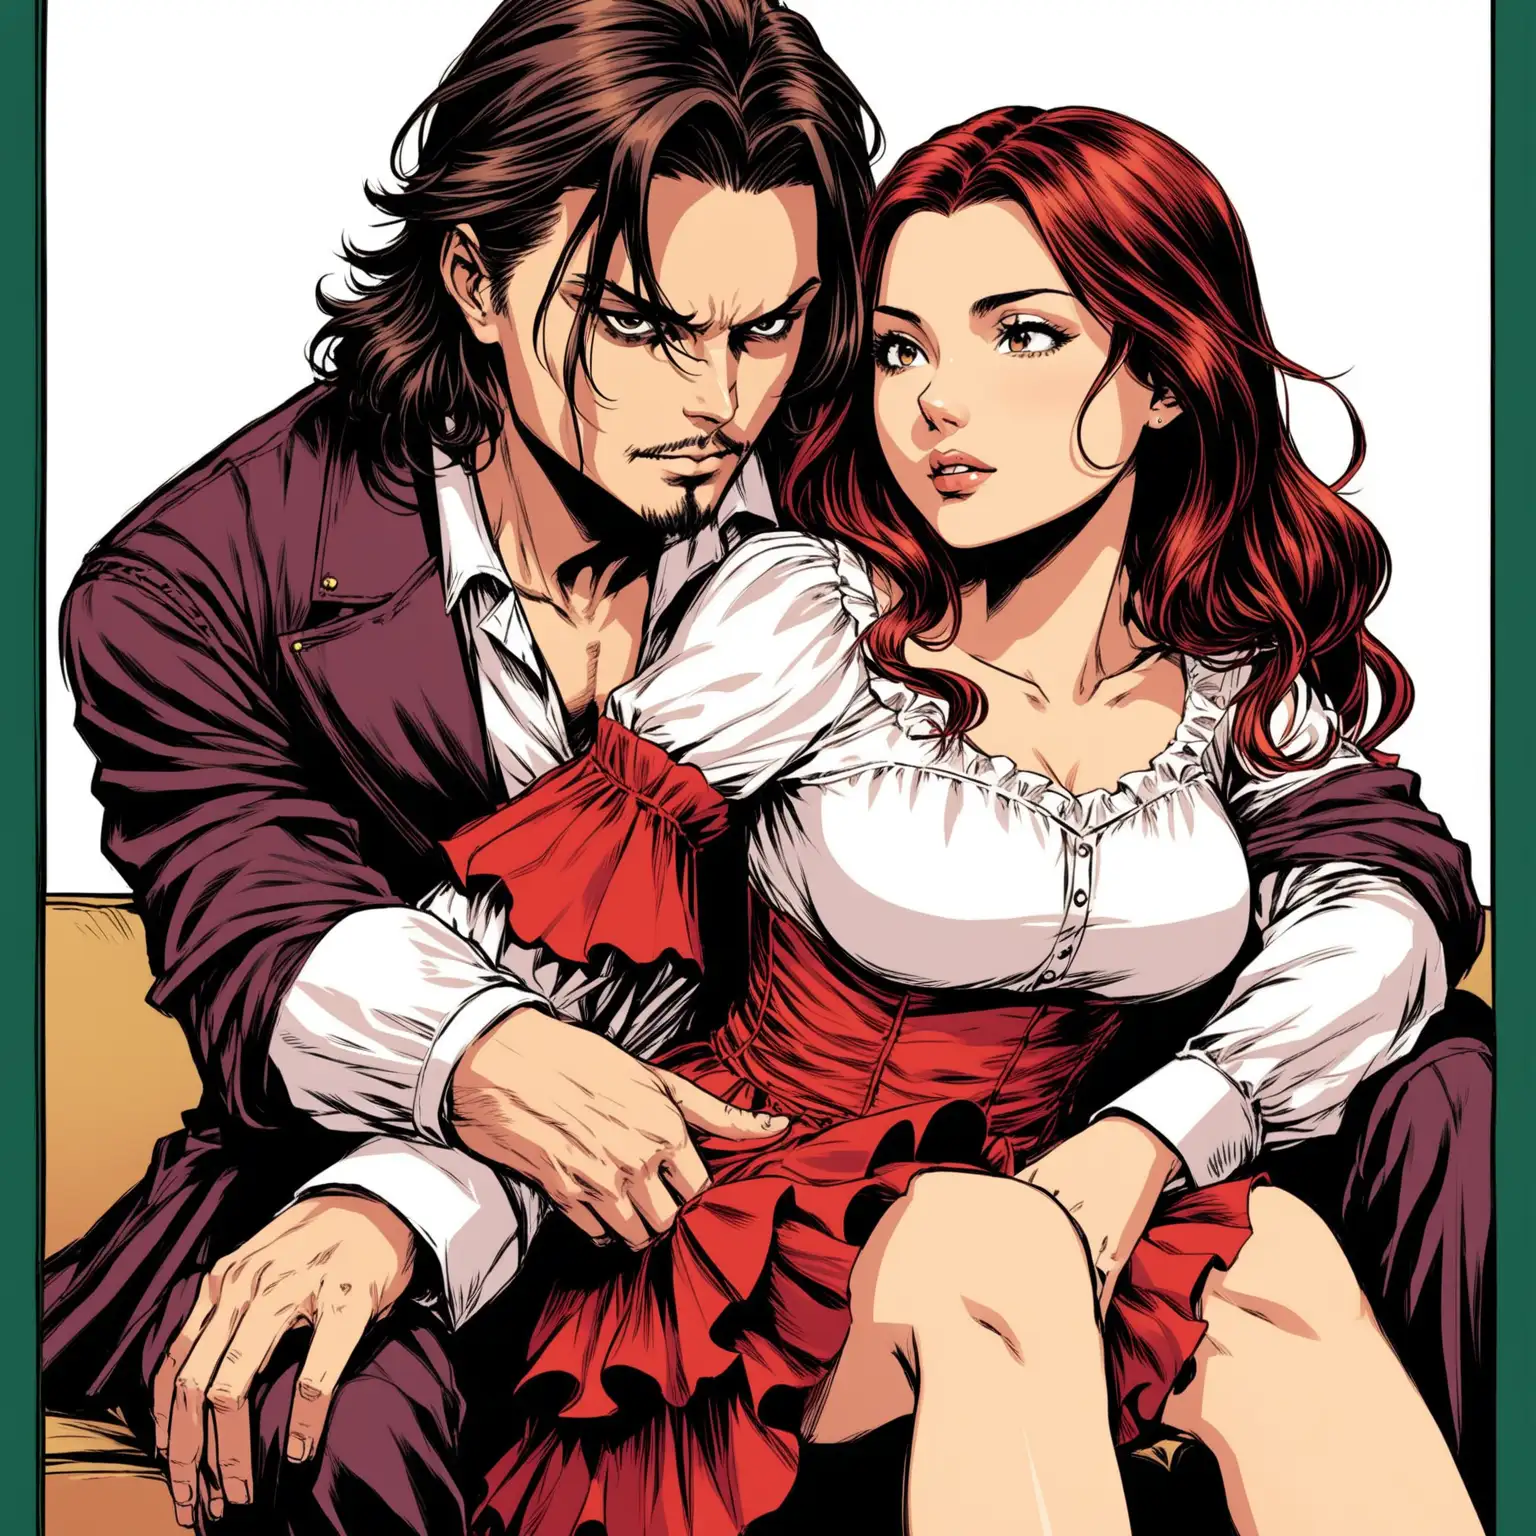 Comic Style Portrait Woman with Stroke by Olivia Casta and Johnny Depp Lookalike in Vintage Attire